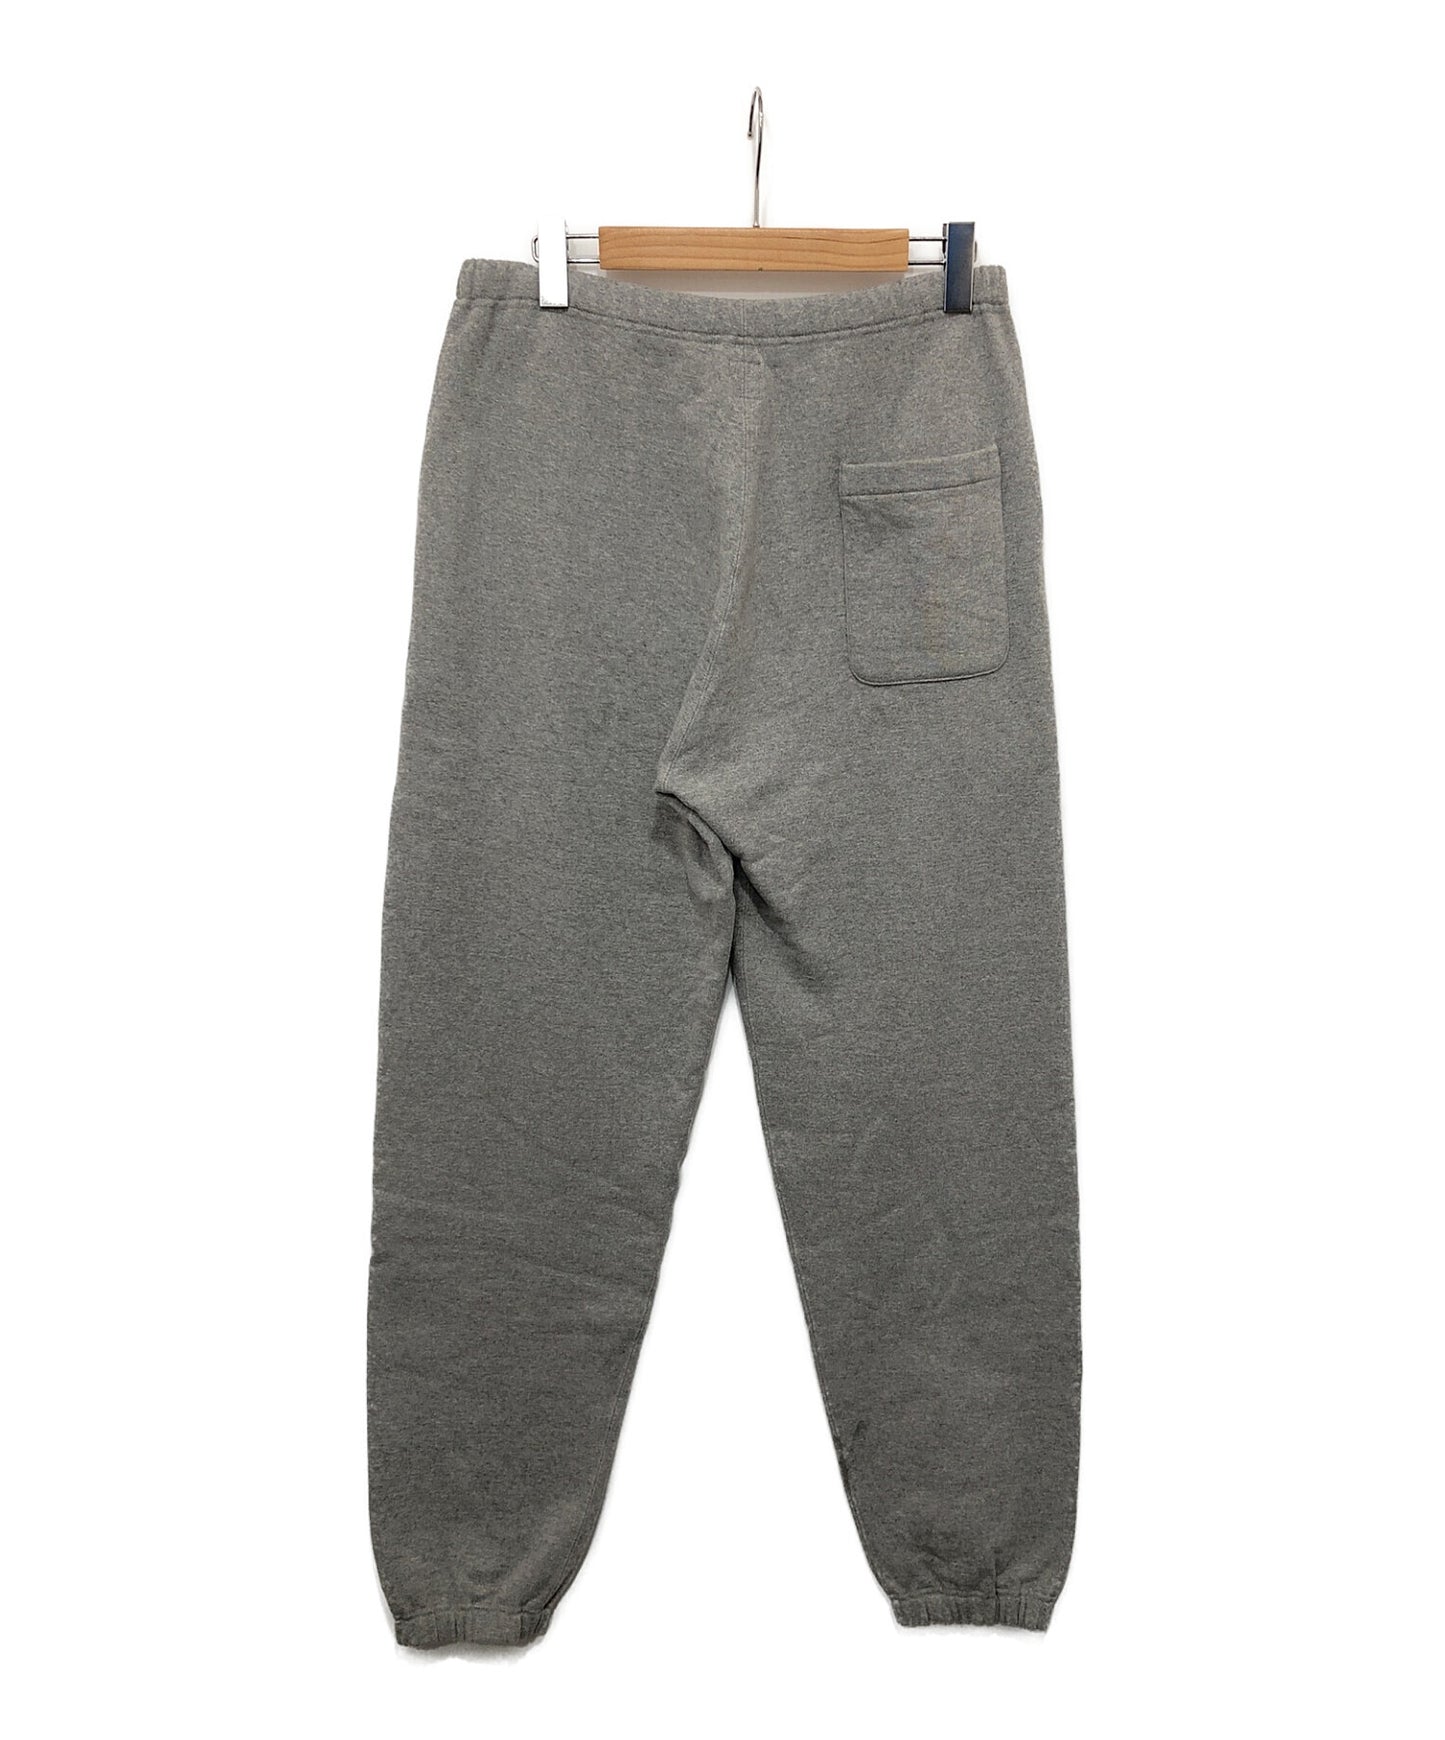 [Pre-owned] HUMAN MADE sweat pants